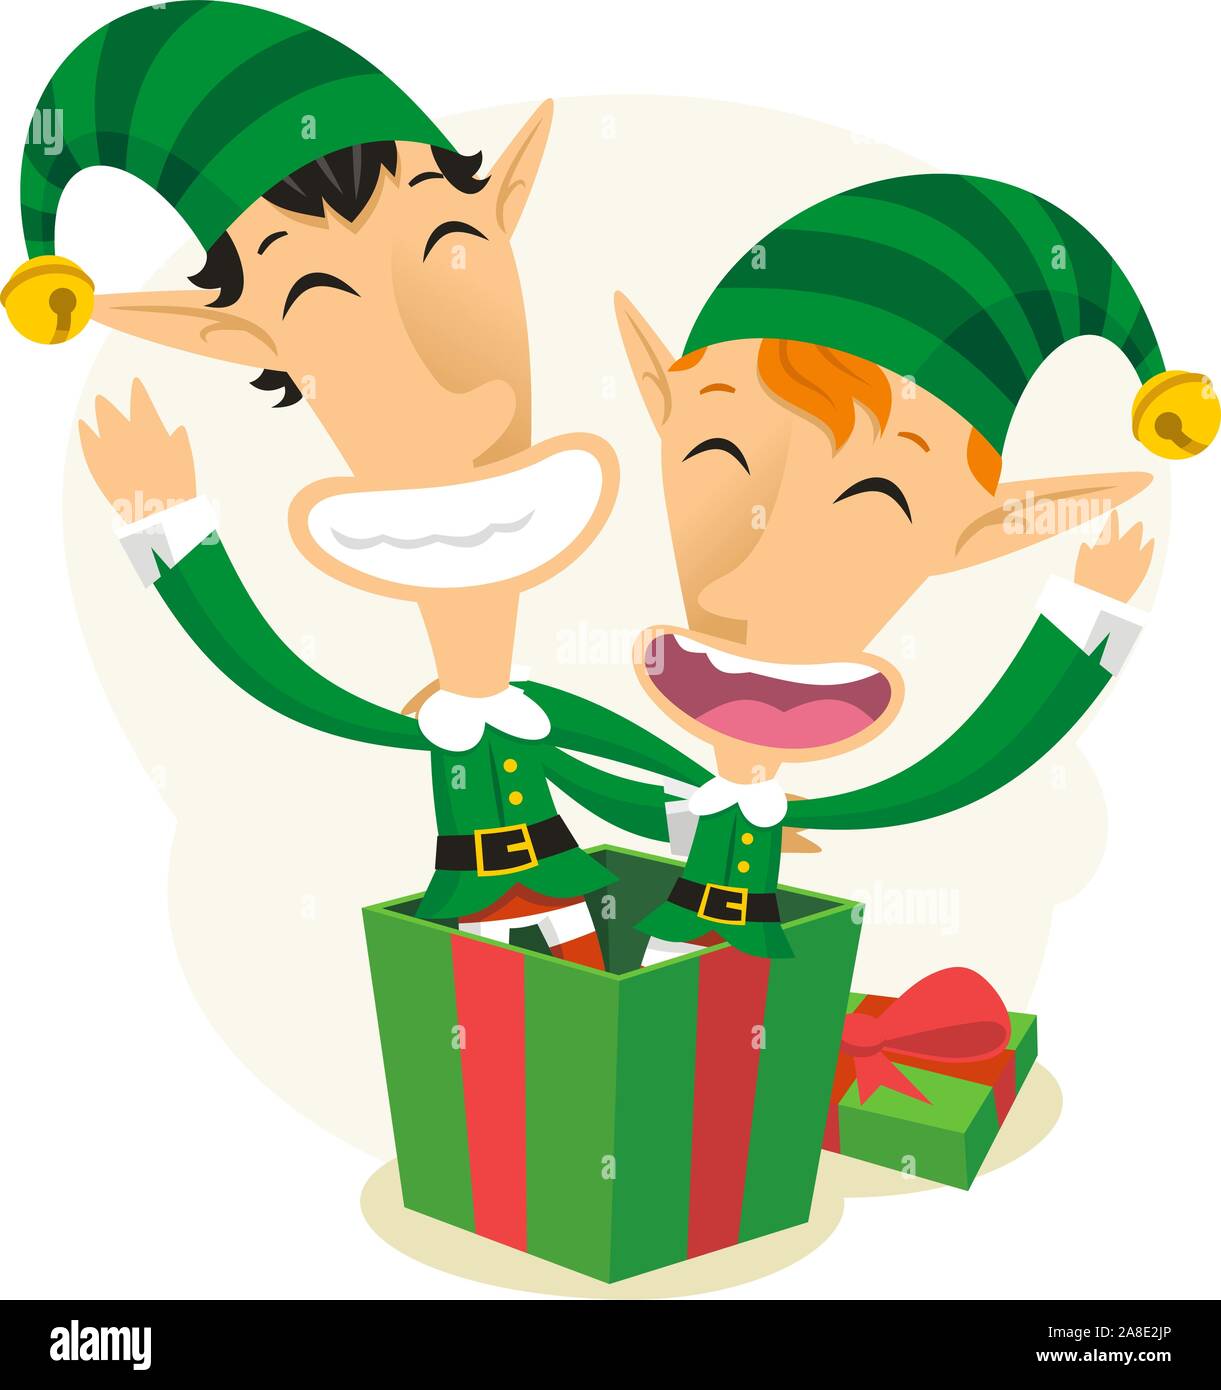 Elves coming out of a gift box Stock Vector